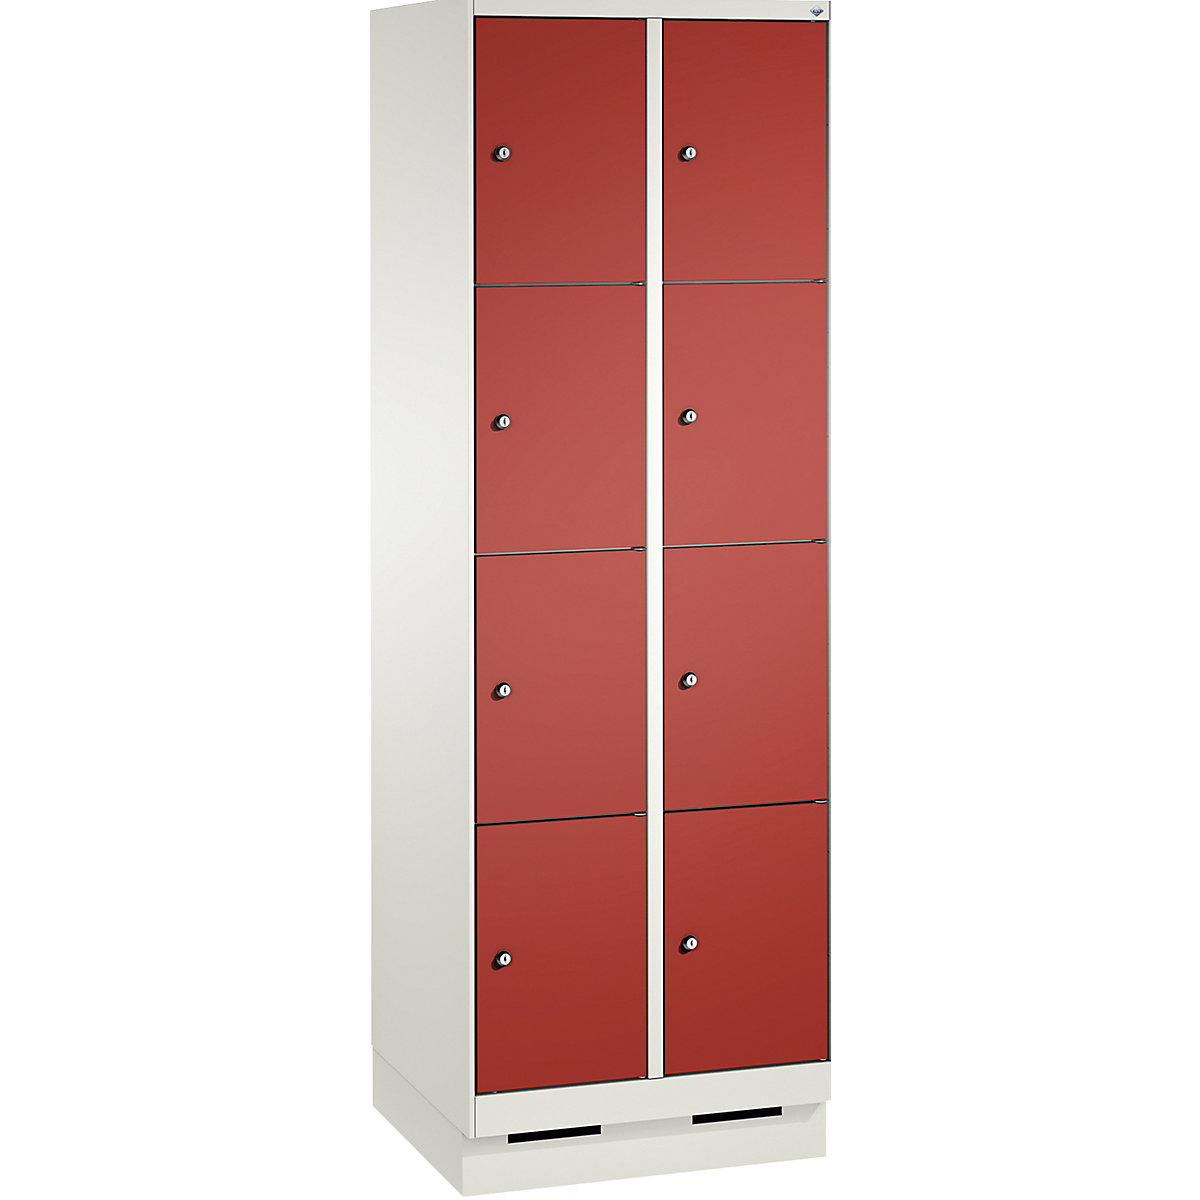 EVOLO locker unit, with plinth – C+P, 2 compartments, 4 shelf compartments each, compartment width 300 mm, traffic white / flame red-12